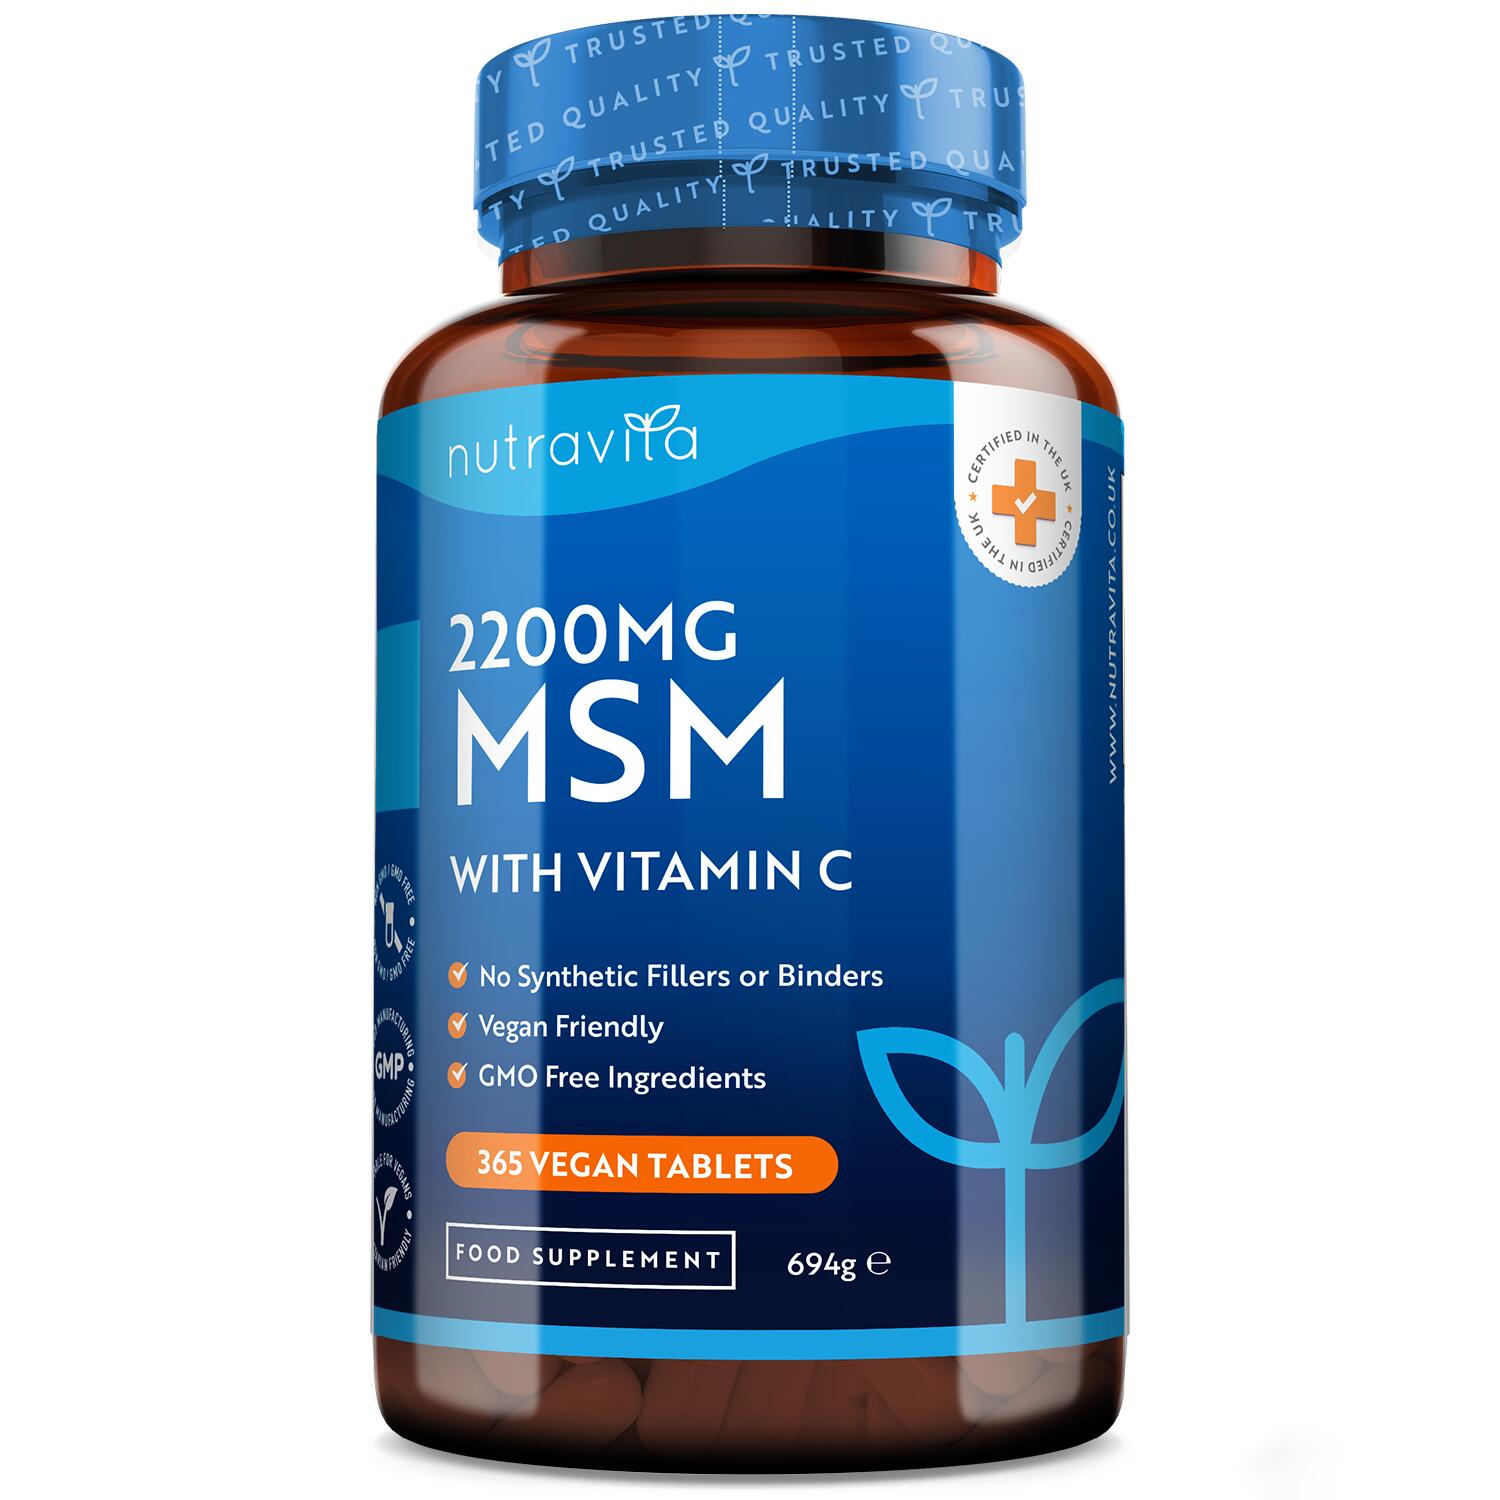 MSM with Vitamin C contributes to collagen formation for the function of bones. 1/6